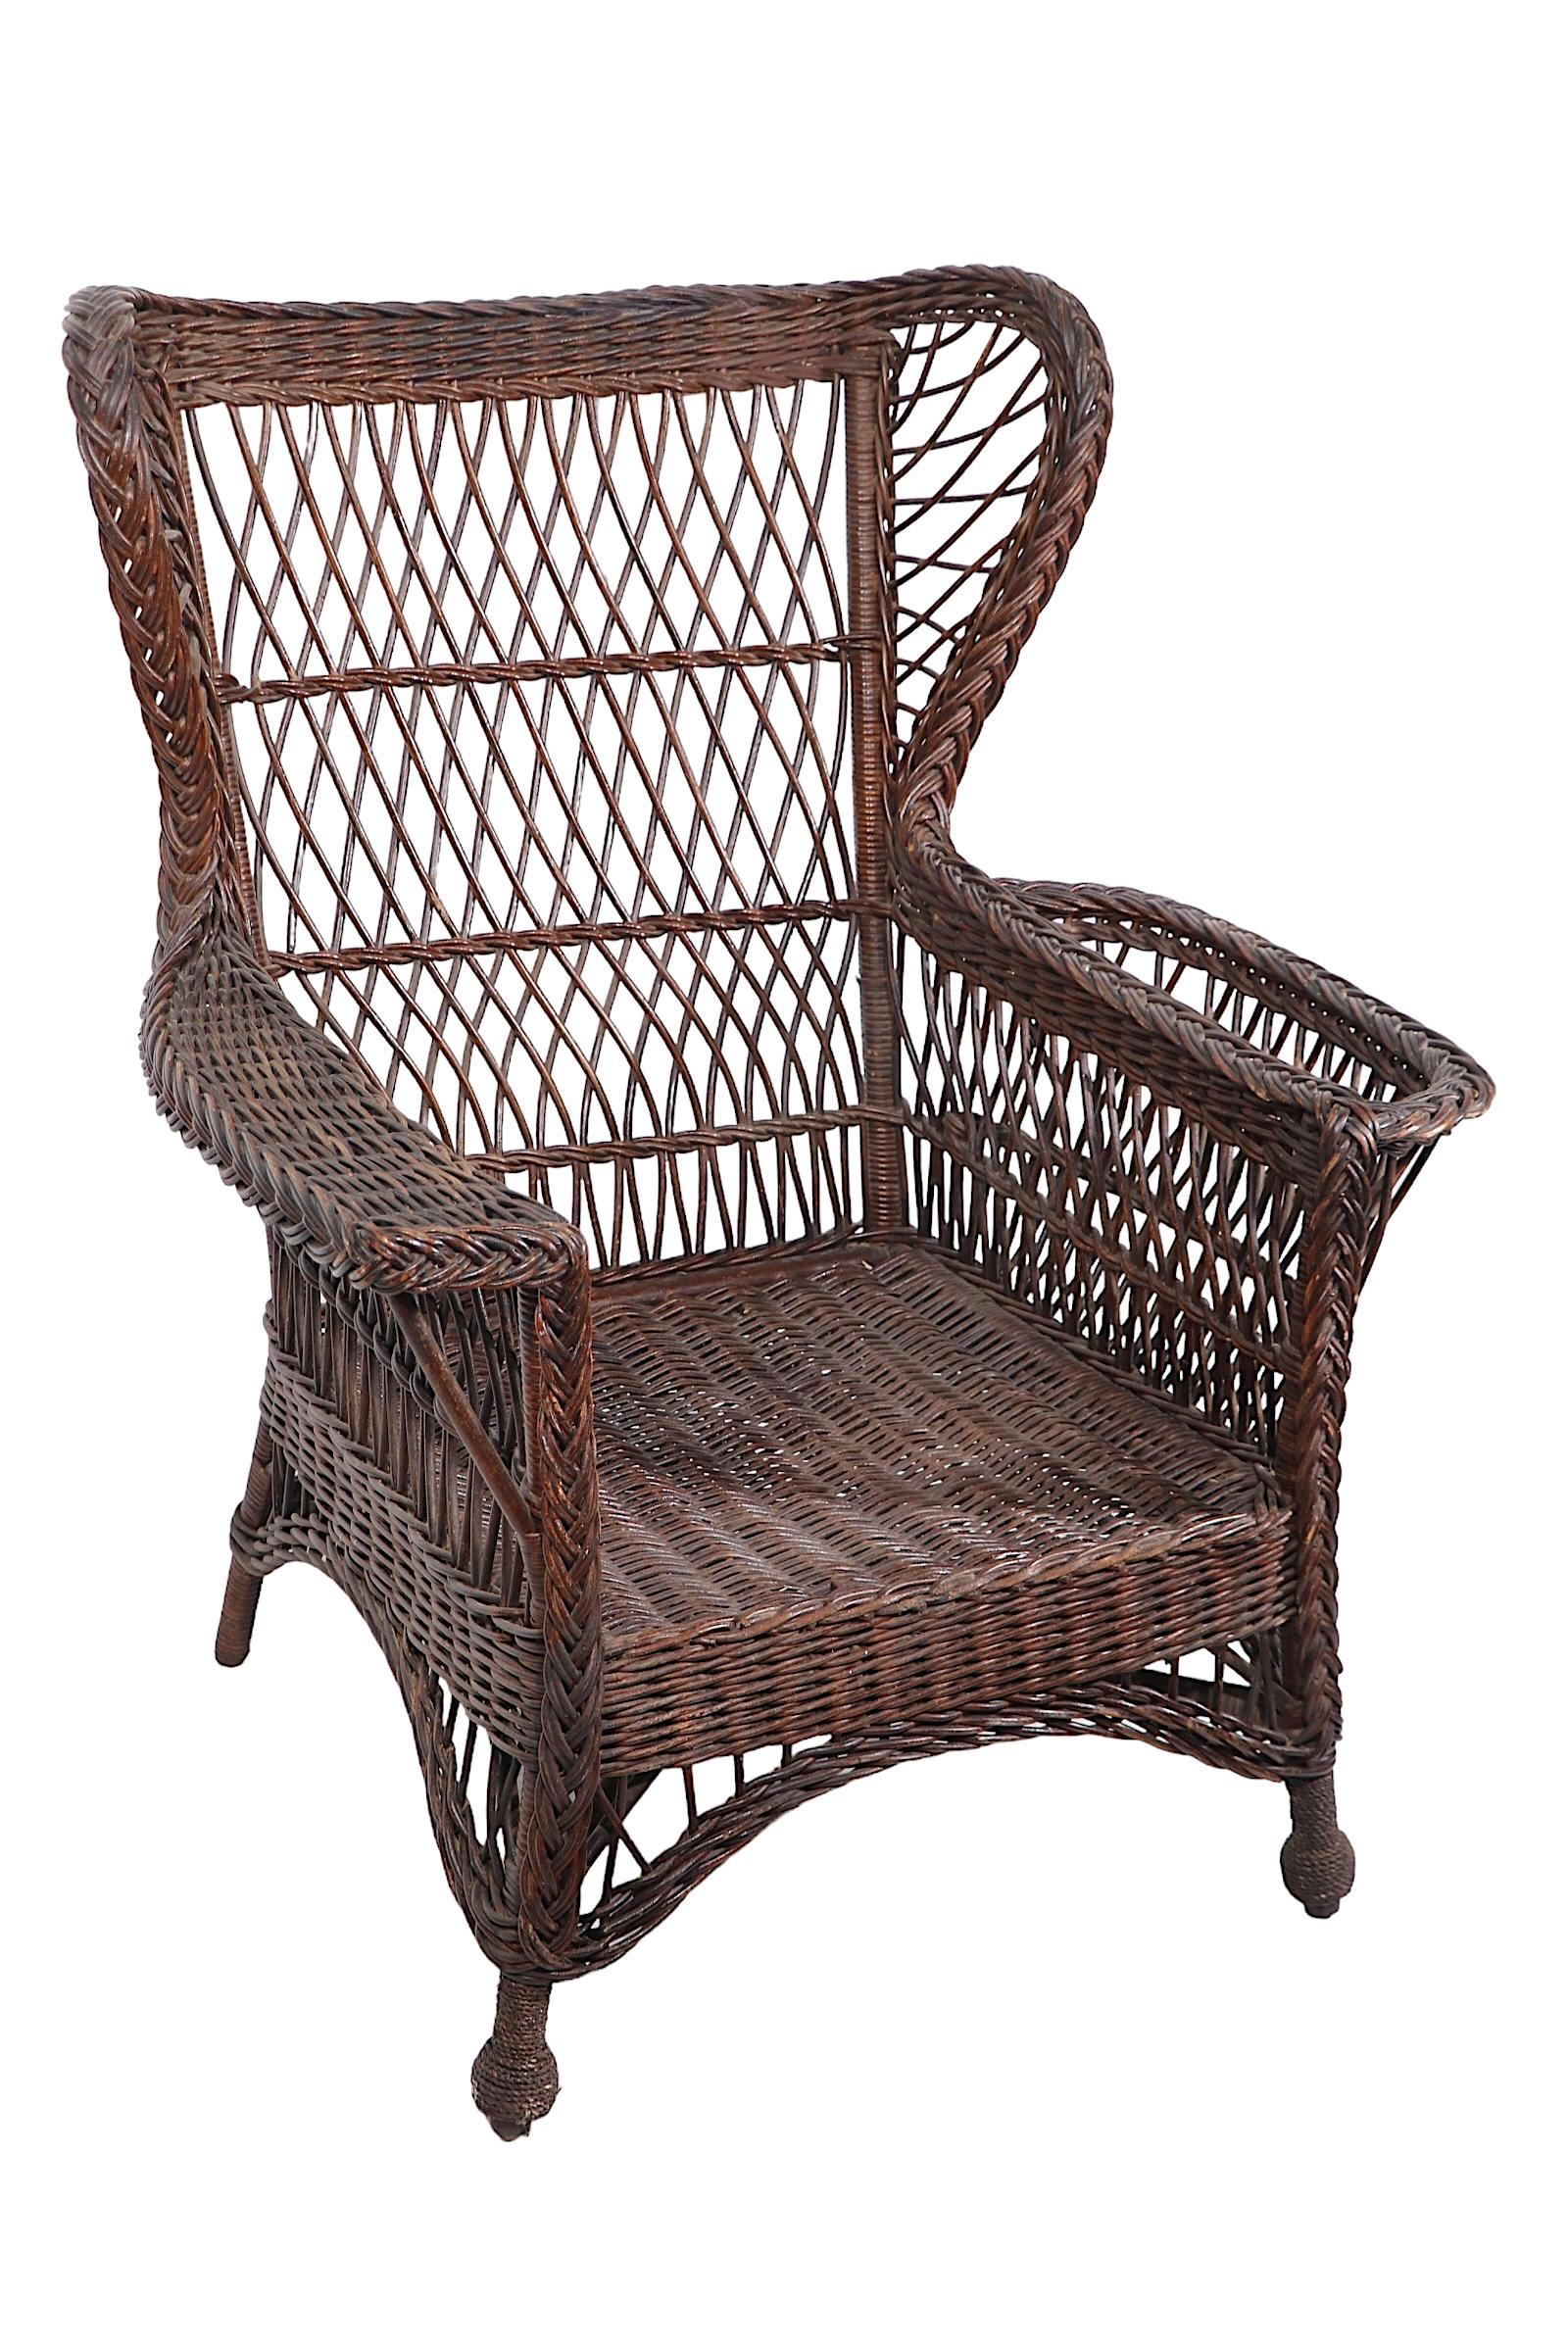 Victorian Bar Harbor Wicker Wing Chair with Magazine Rack Arm For Sale 9